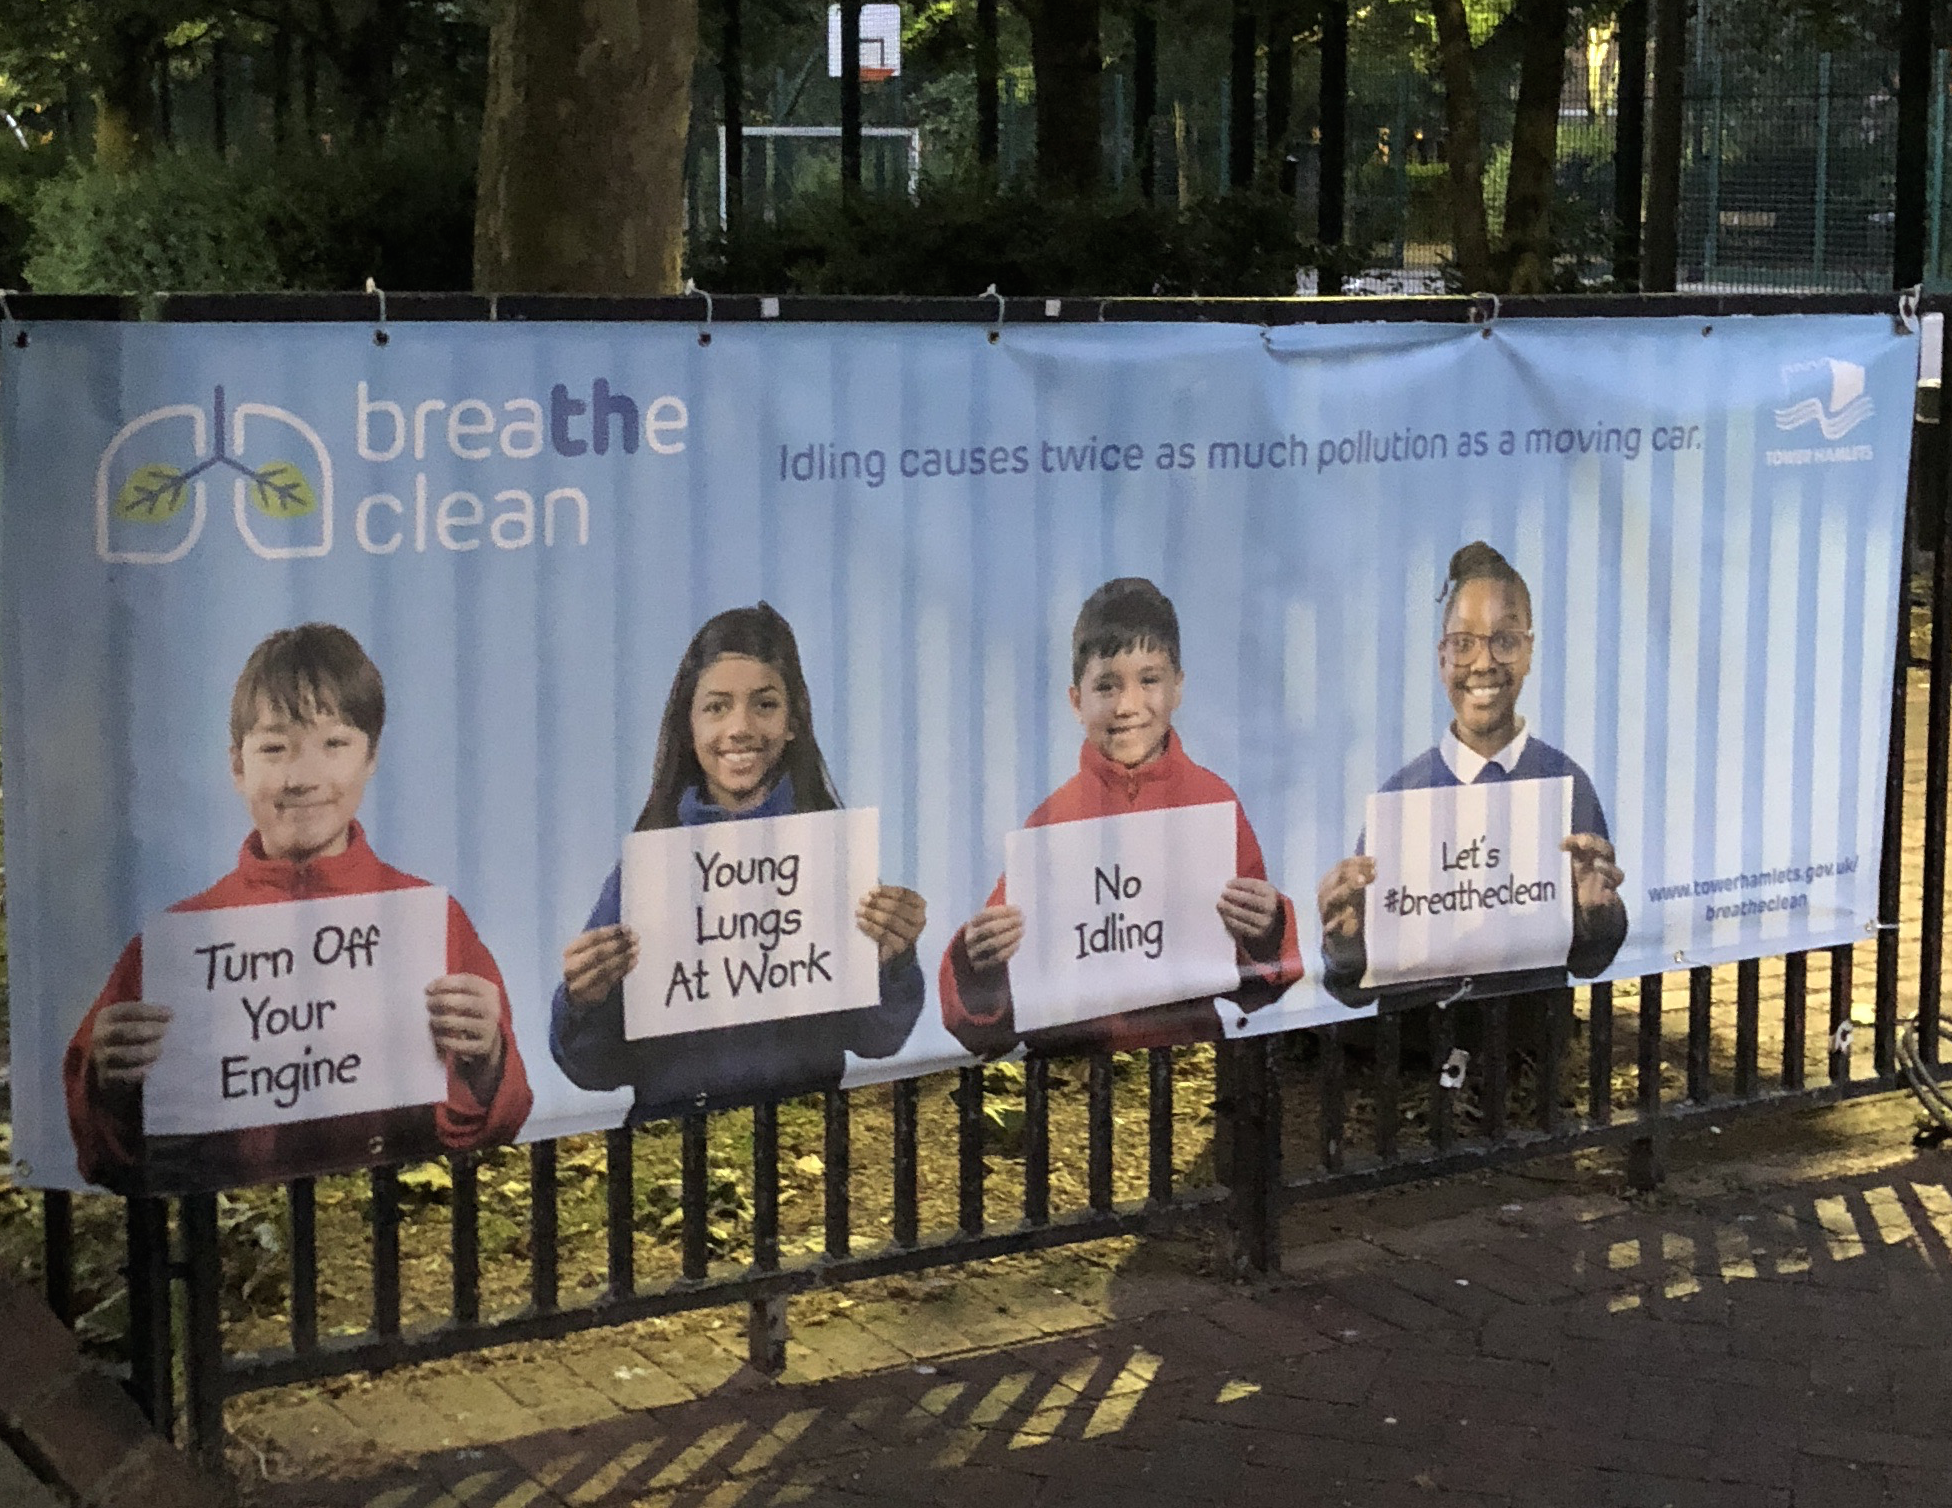 Campaigns such as "Breathe Clean" in the U.K. emphasize the threat that air pollution poses to children. This poster, taped to the gate of a park, aims to bring awareness to both children and parents. Image by Rohan Naik. United Kingdom, 2018.